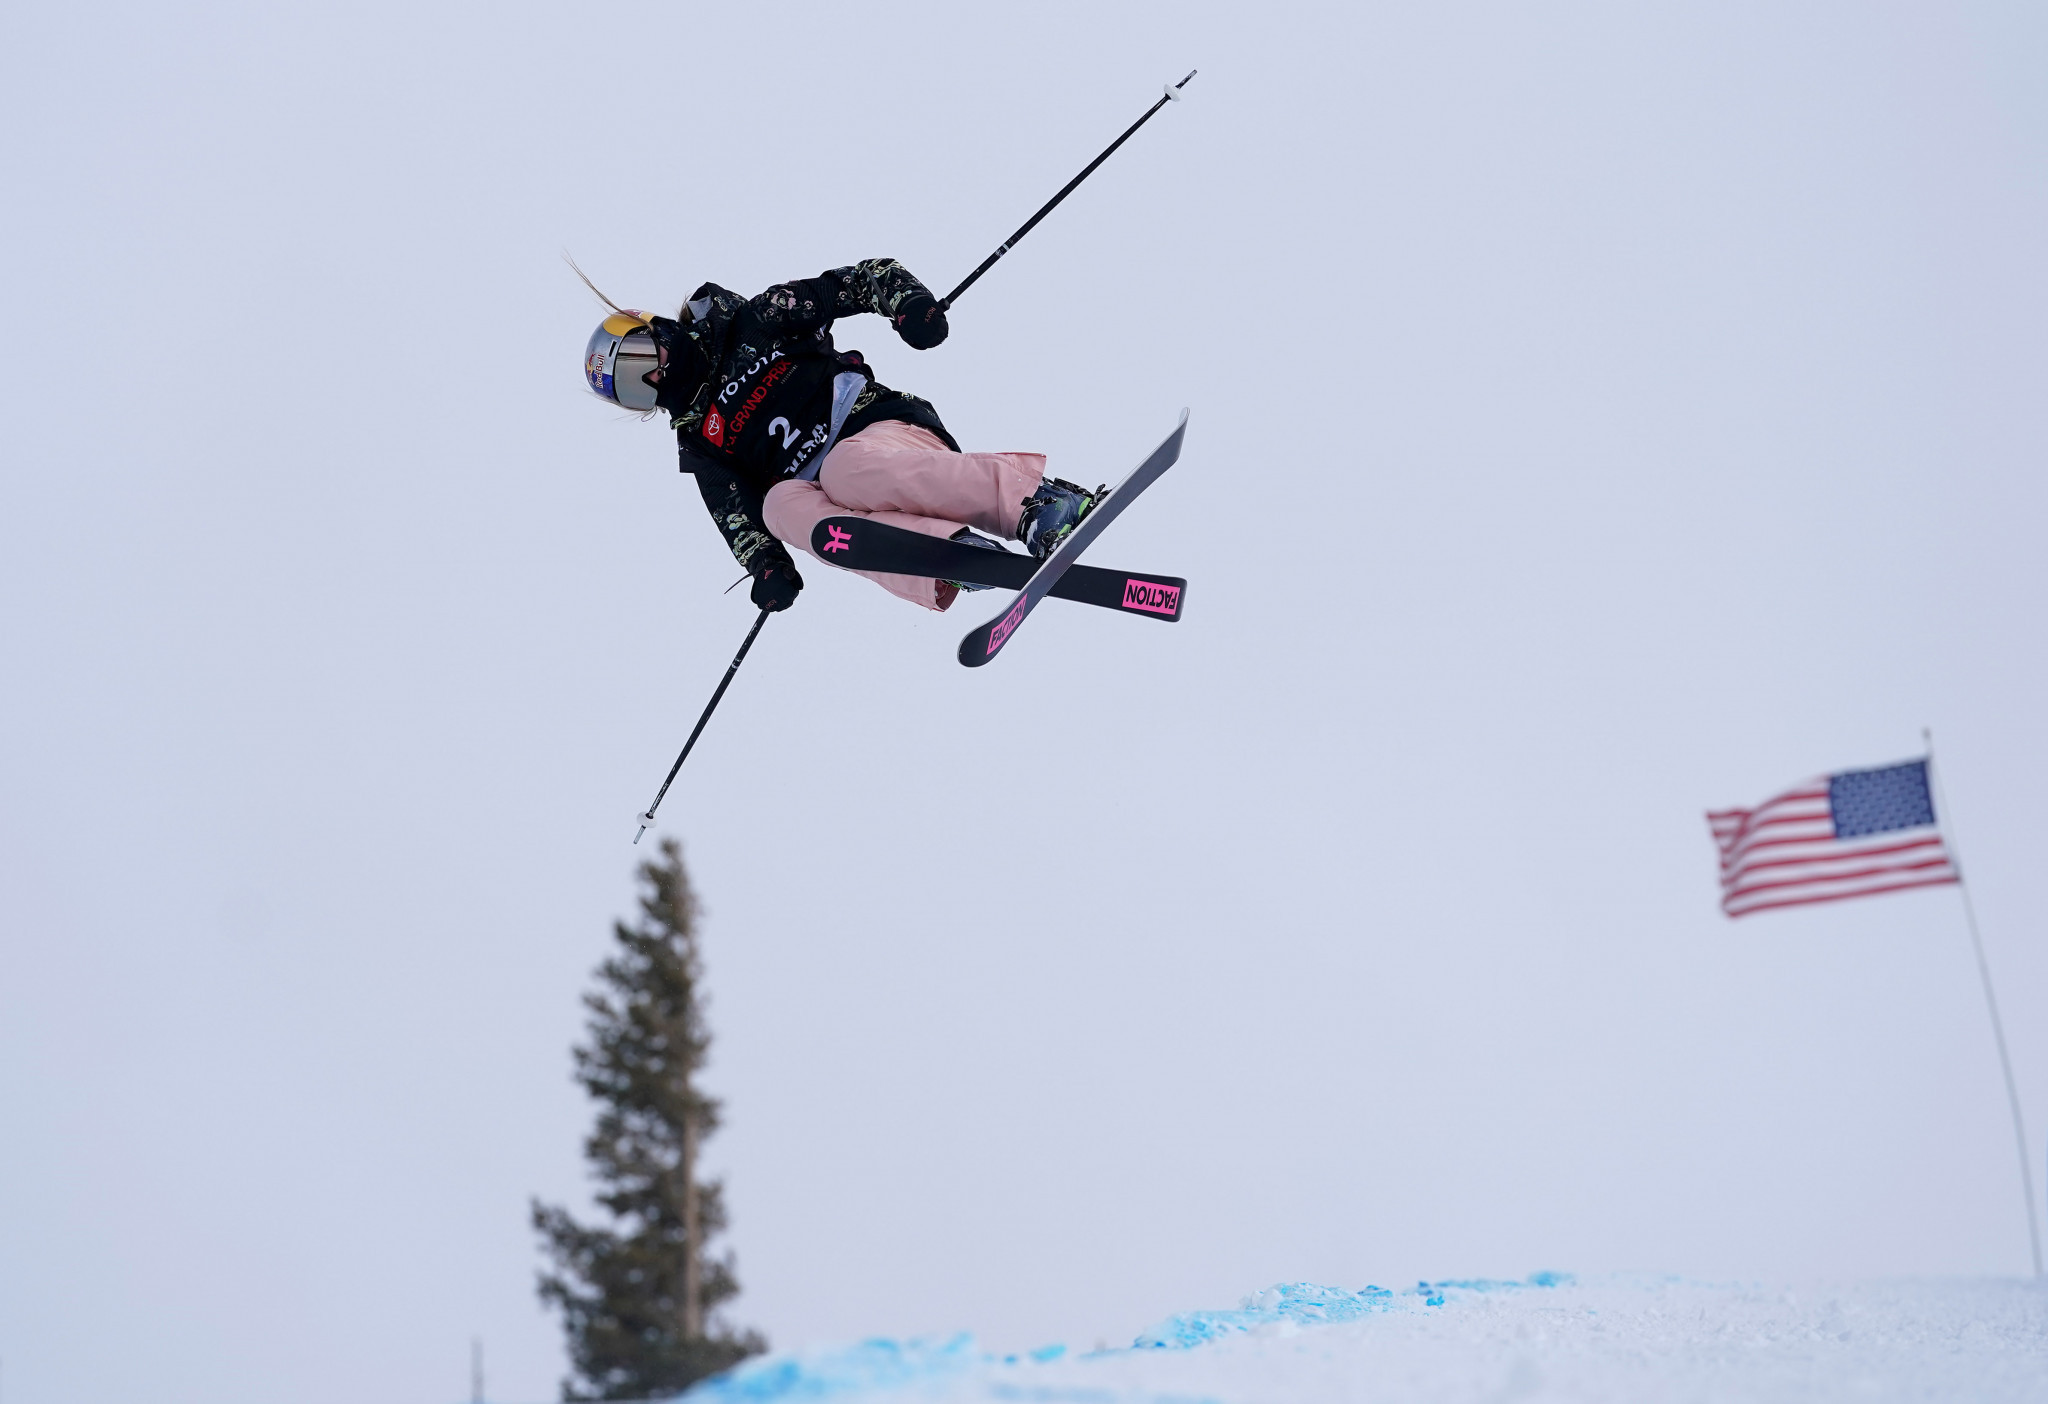 Sildaru and Sharpe lead strong field for FIS Halfpipe World Cup in Cardrona